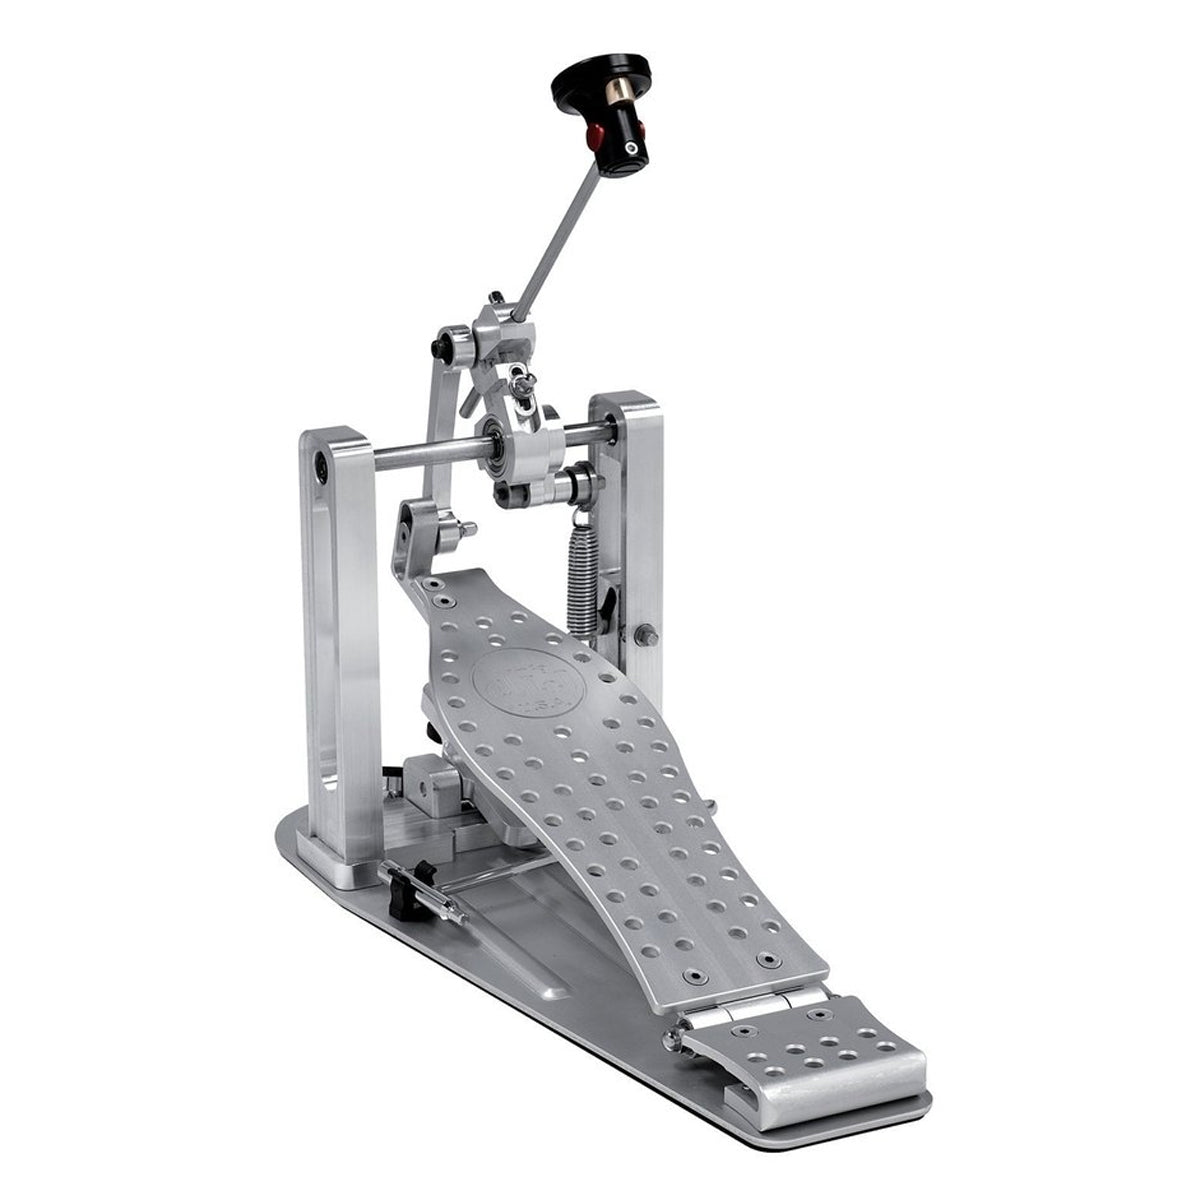 DW MDD Single Bass Drum Pedal (Machined Direct Drive)